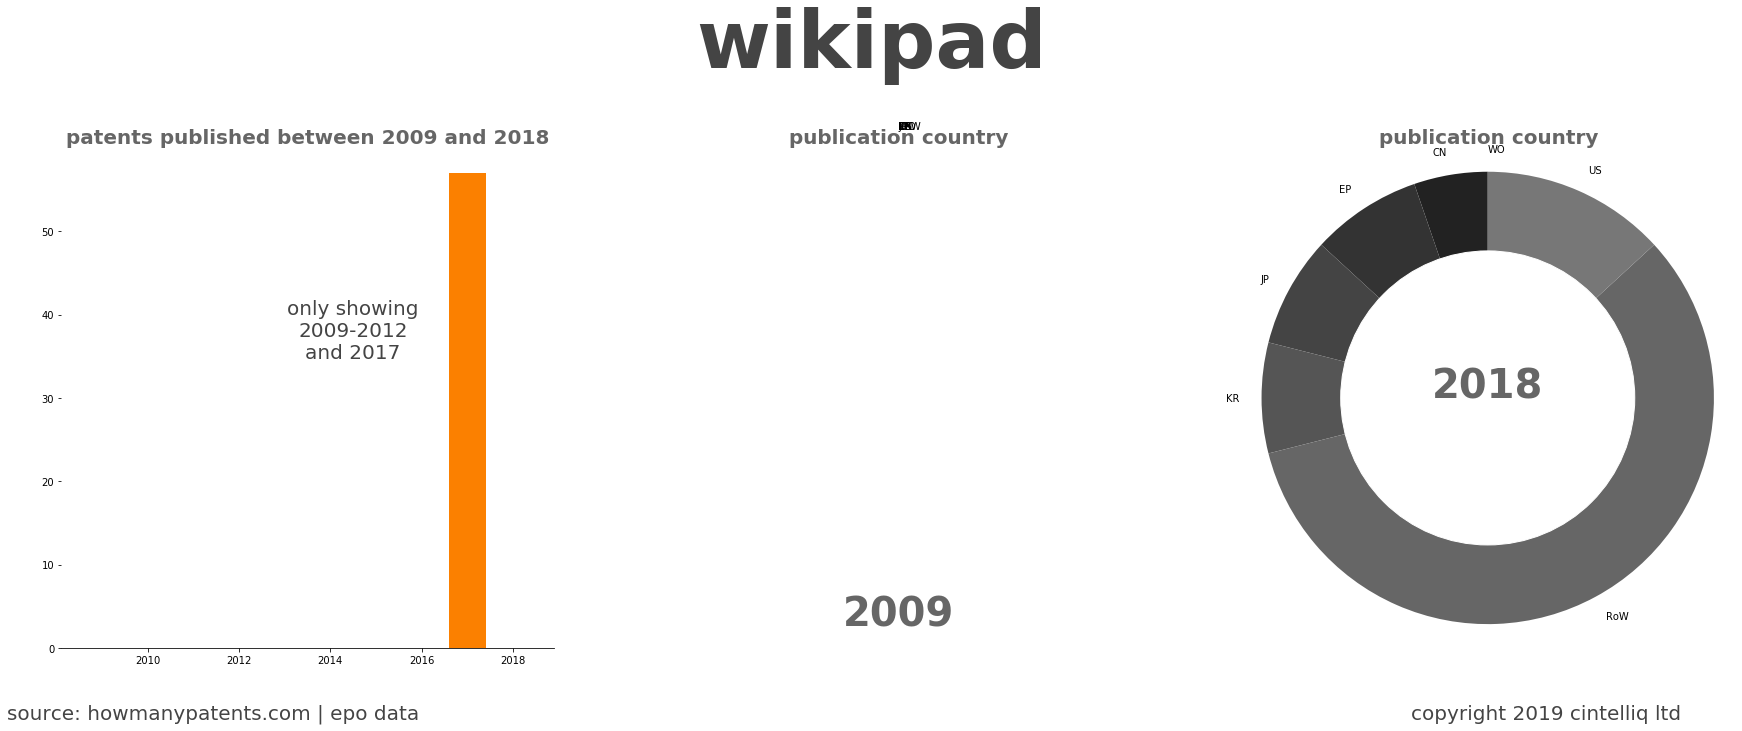 summary of patents for Wikipad